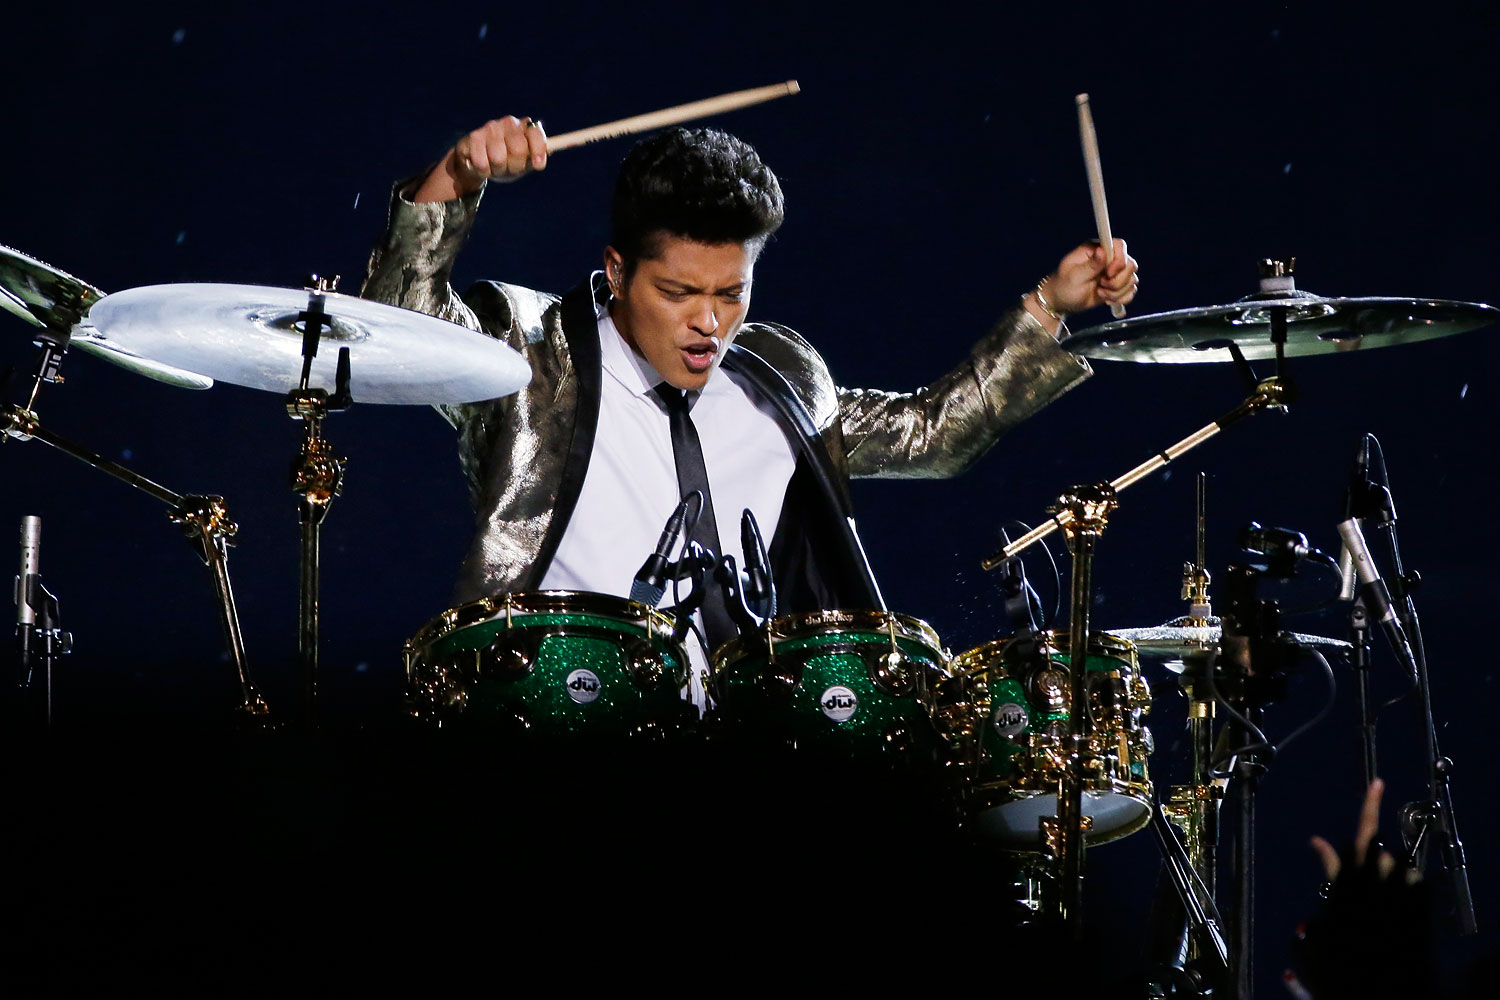 Bruno Mars performs during the halftime show of the NFL Super Bowl XLVIII football game Sunday, Feb. 2, 2014, in East Rutherford, N.J.